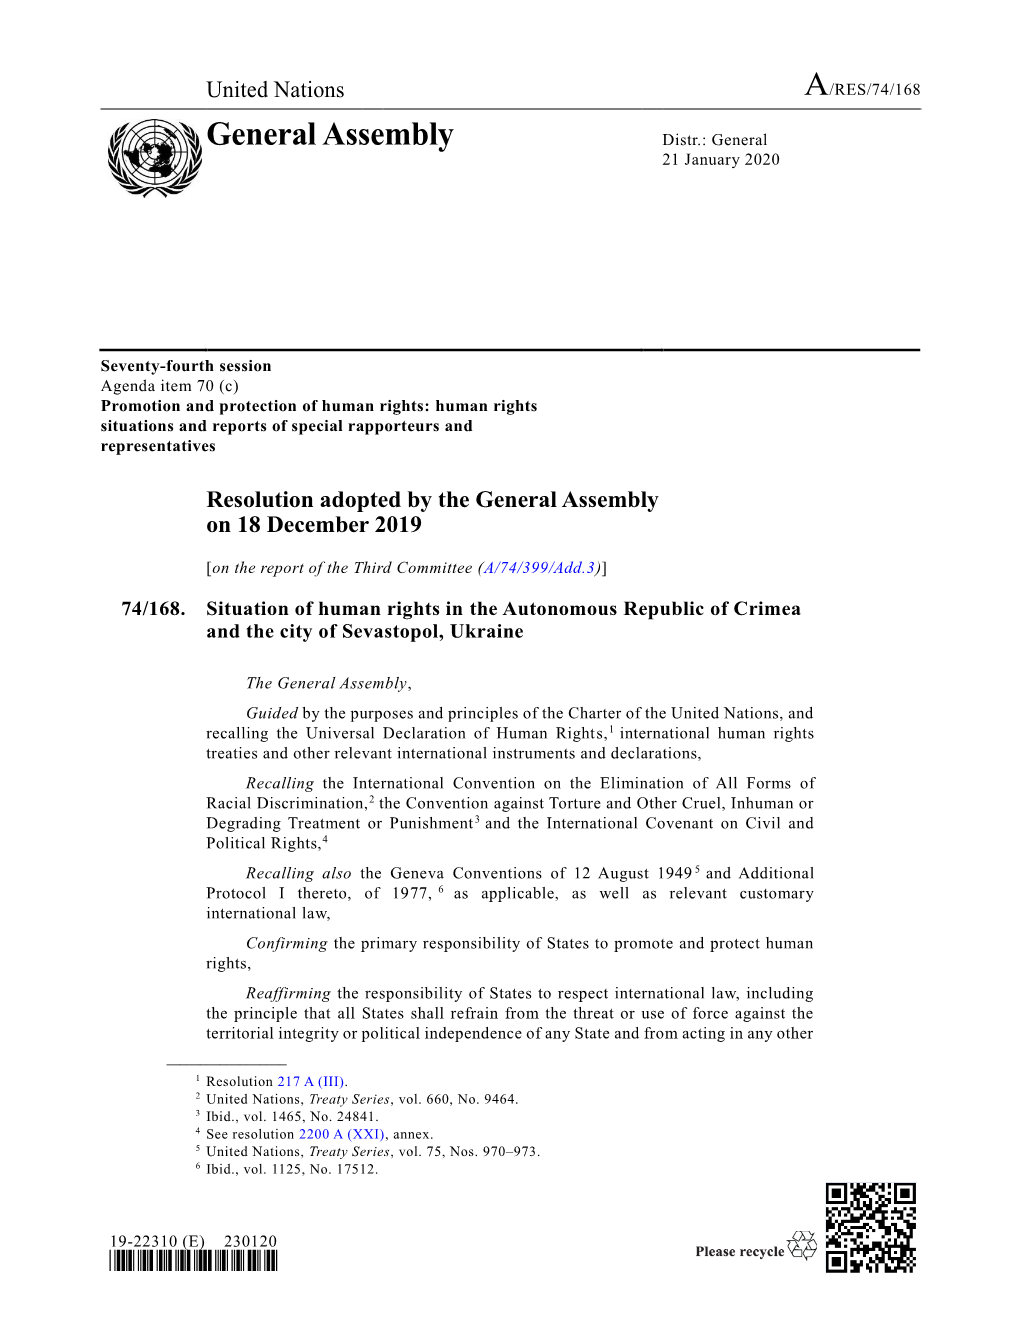 General Assembly Distr.: General 21 January 2020